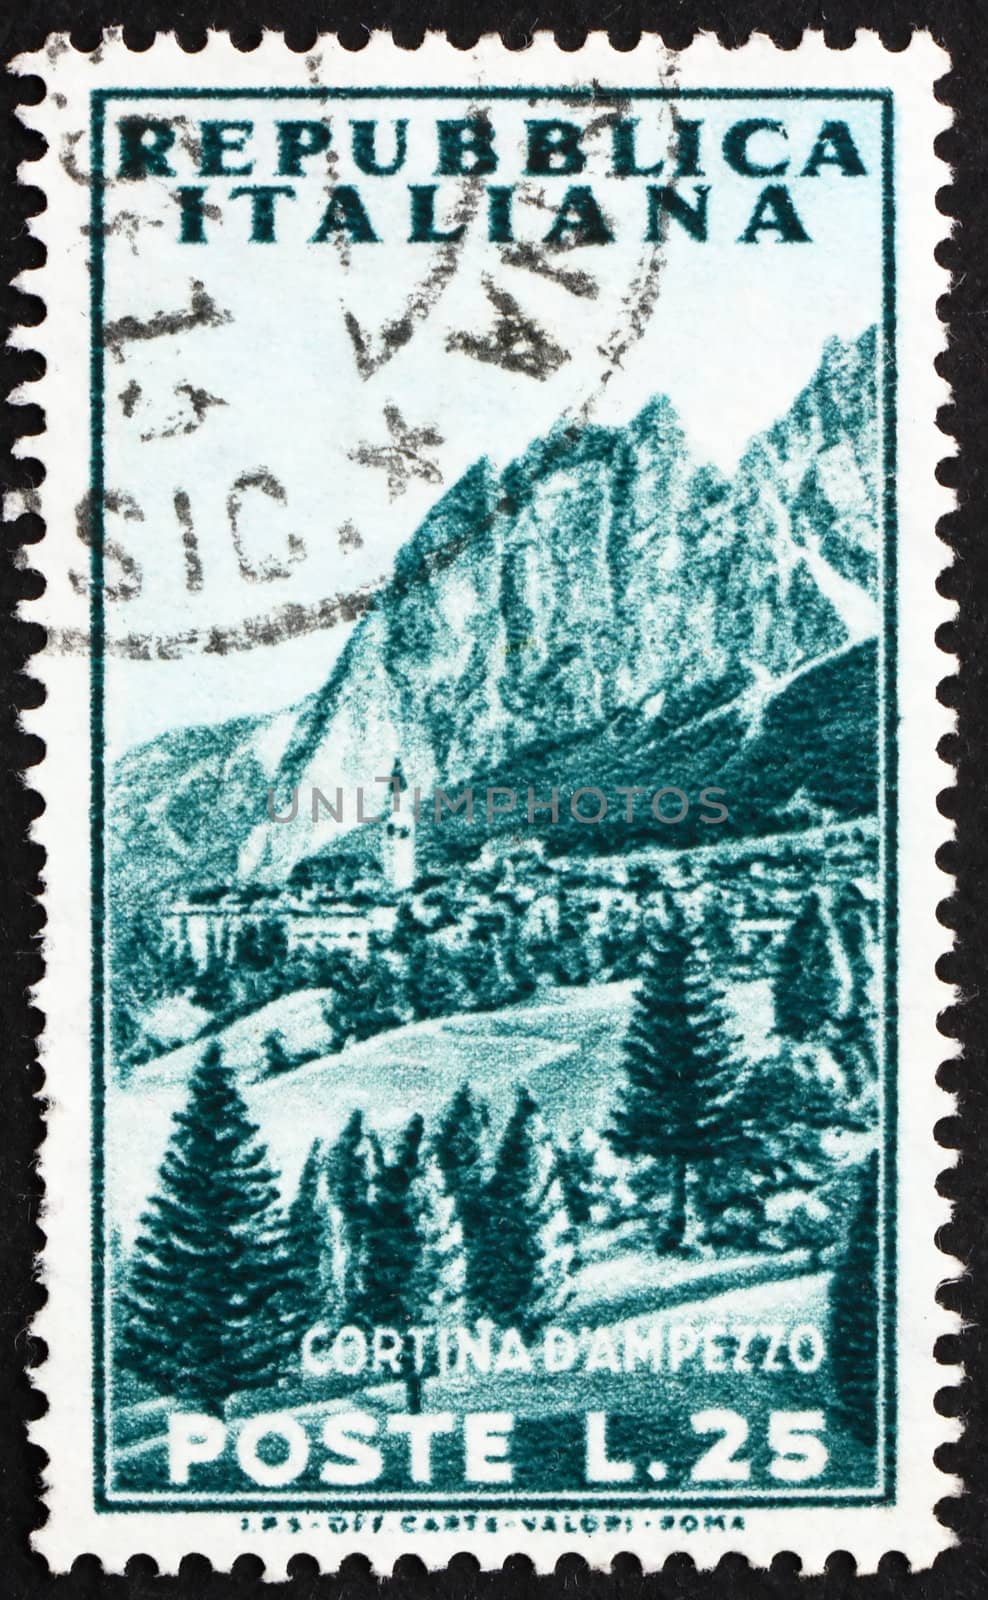 ITALY - CIRCA 1953: a stamp printed in the Italy shows View of Mountain, Cortina d'Ampezzo, circa 1953